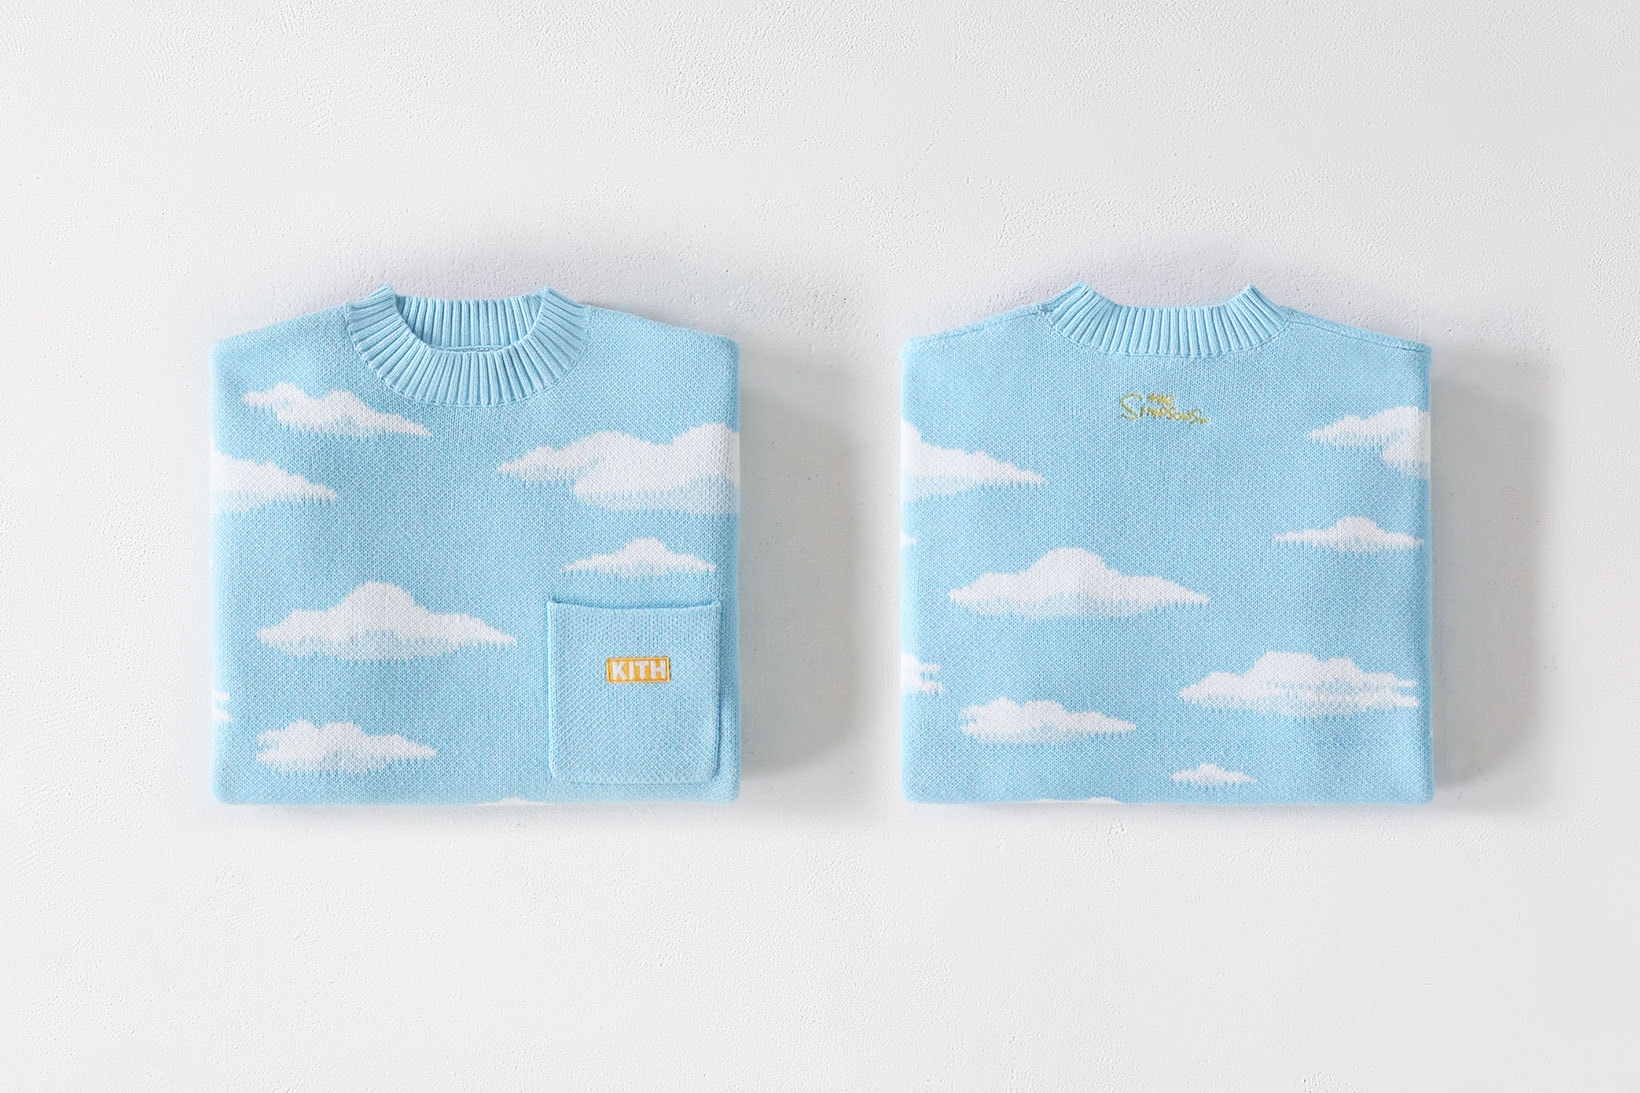 the simpsons kith collaboration knitwear sweater sky blue clouds logo